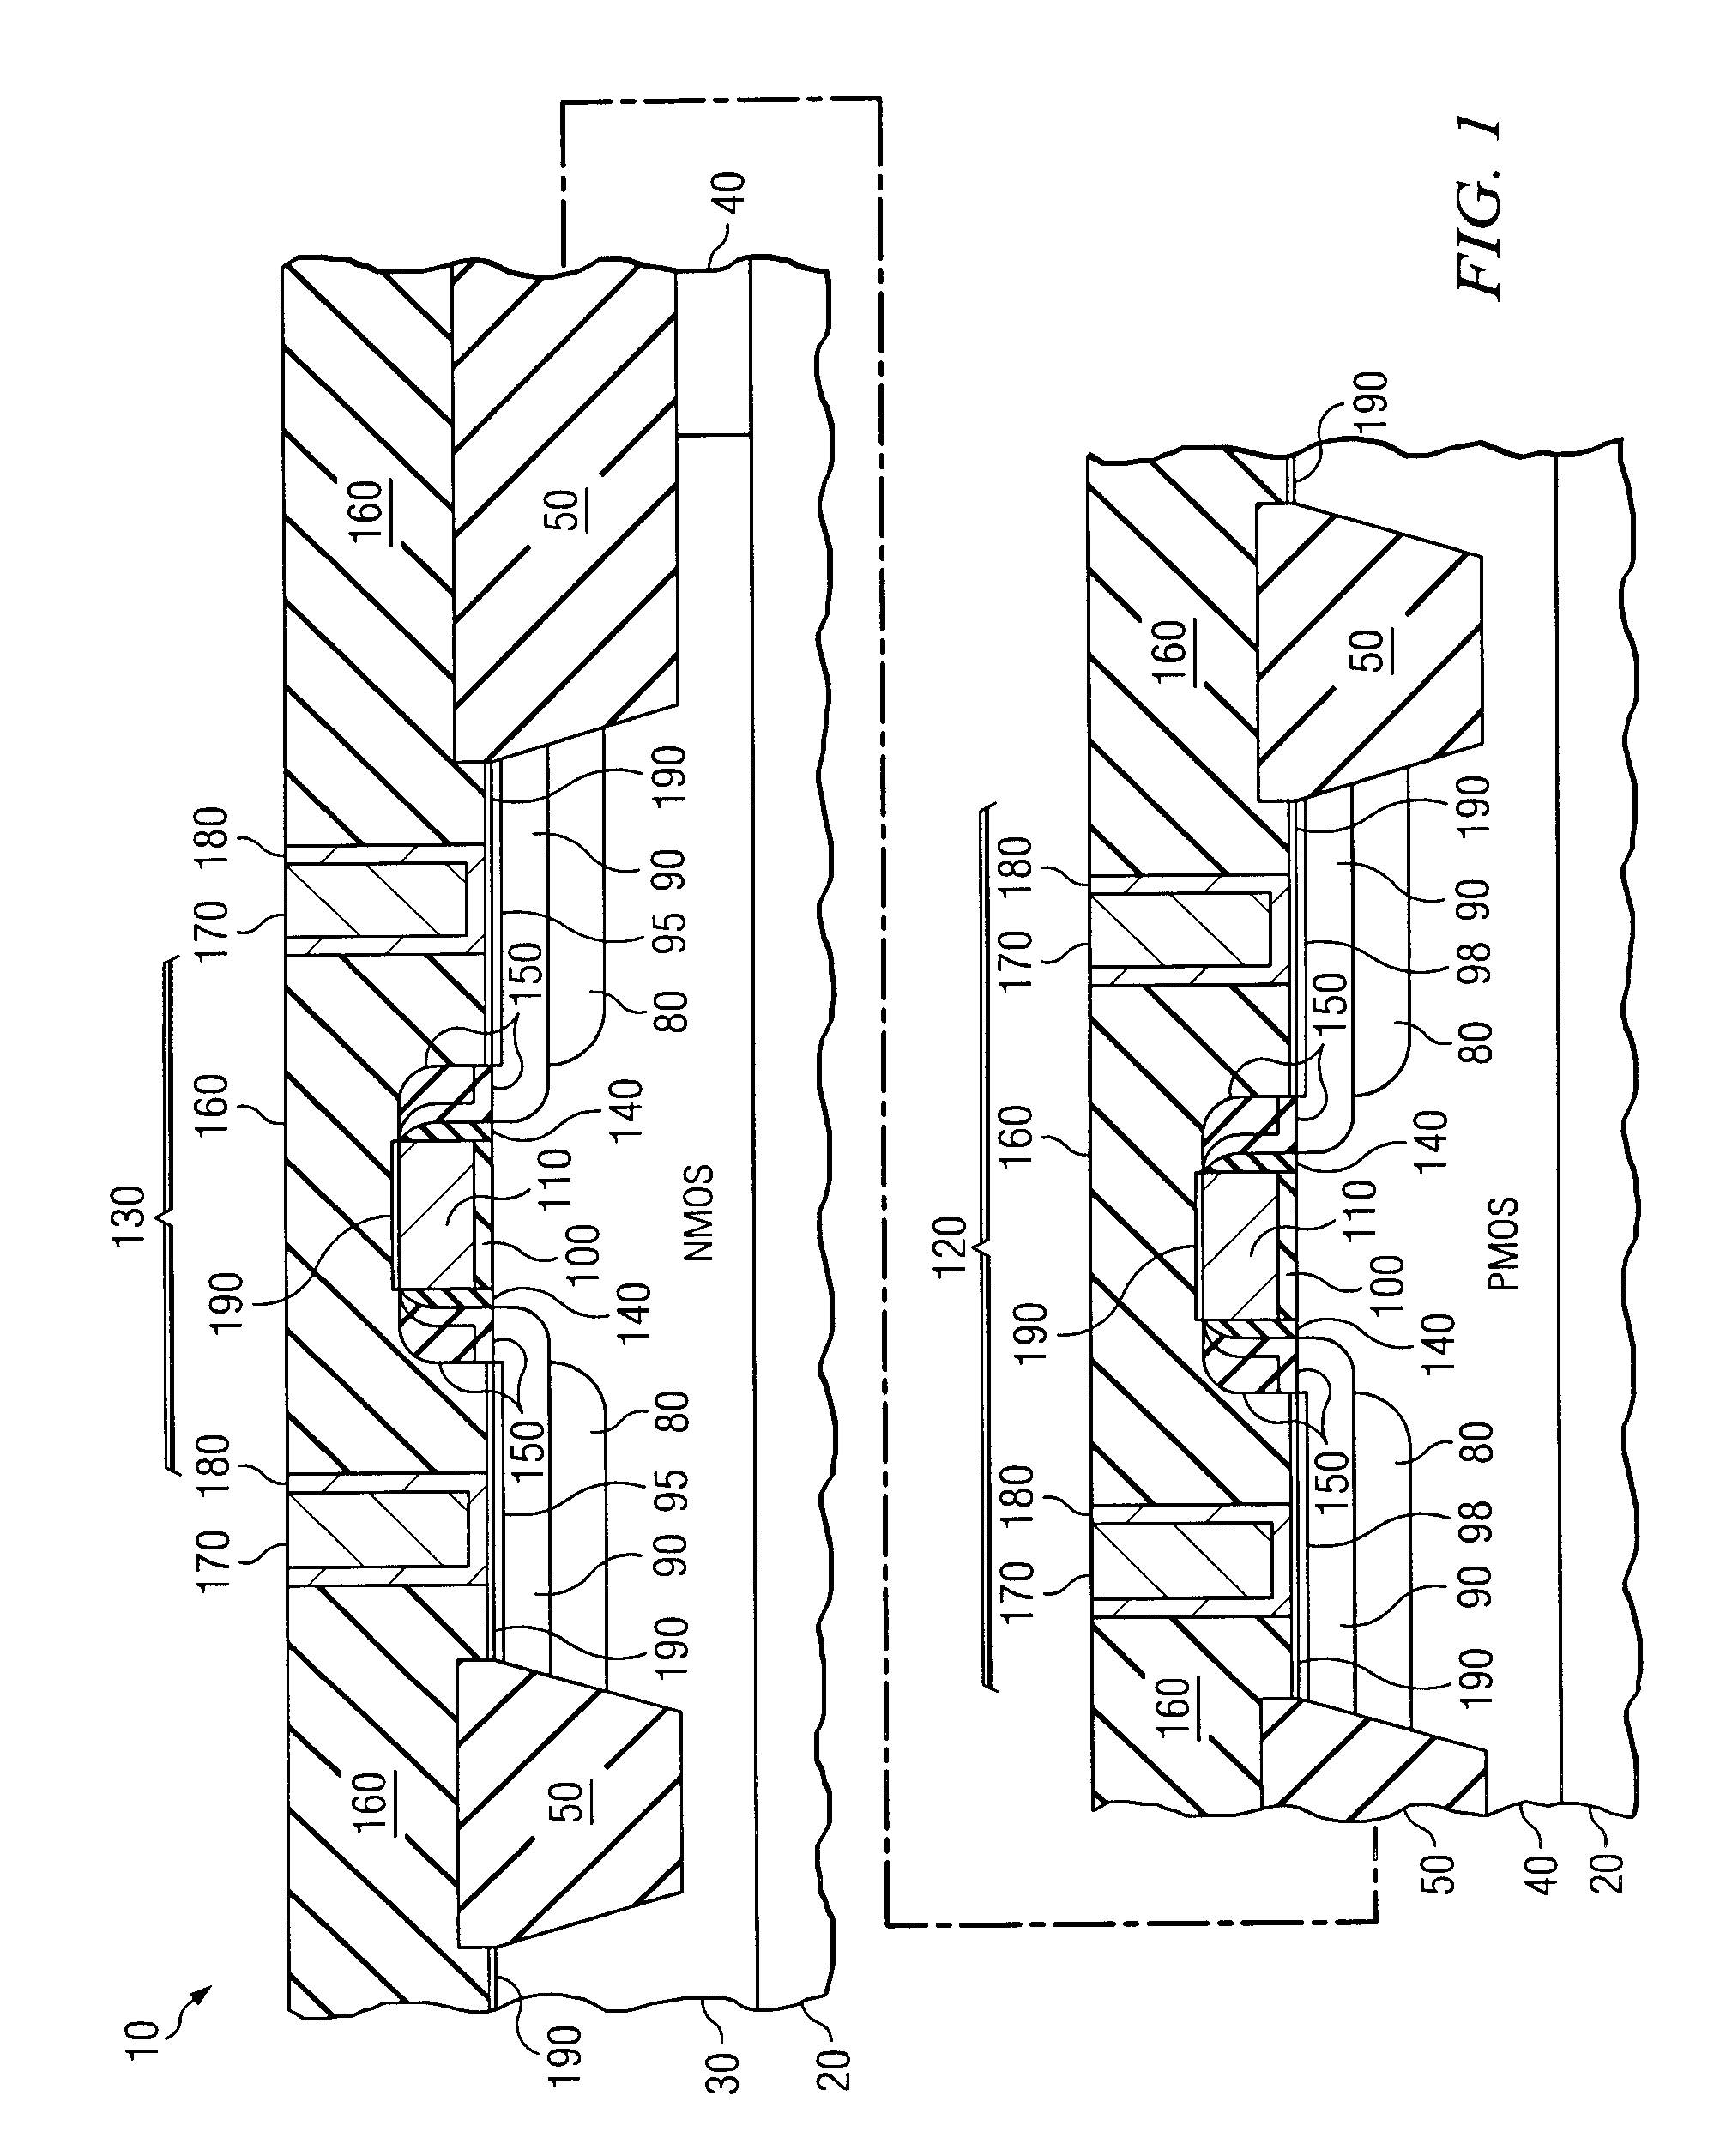 Mos device and process having low resistance silicide interface using additional source/drain implant